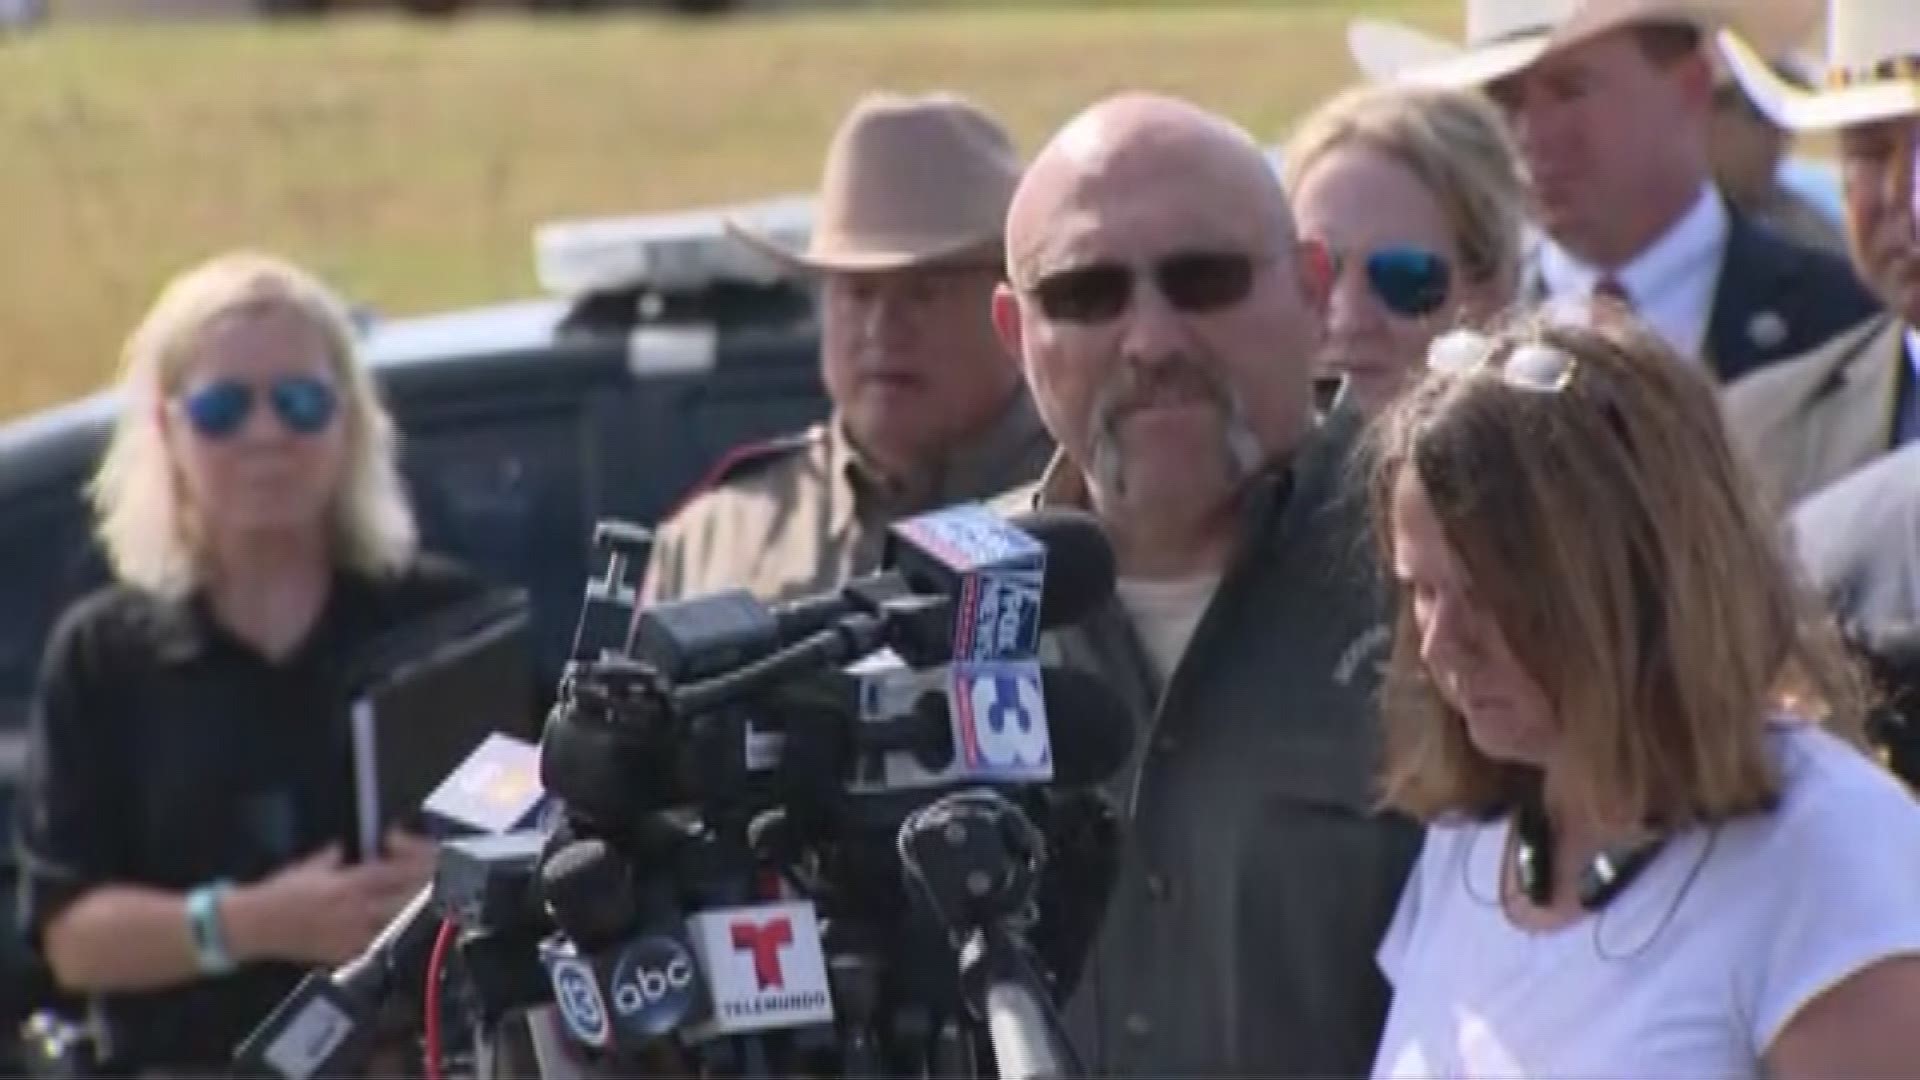 Pastor Pomeroy, wife Sherri, speak for first time publicly following mass shooting that claimed most of congregation.